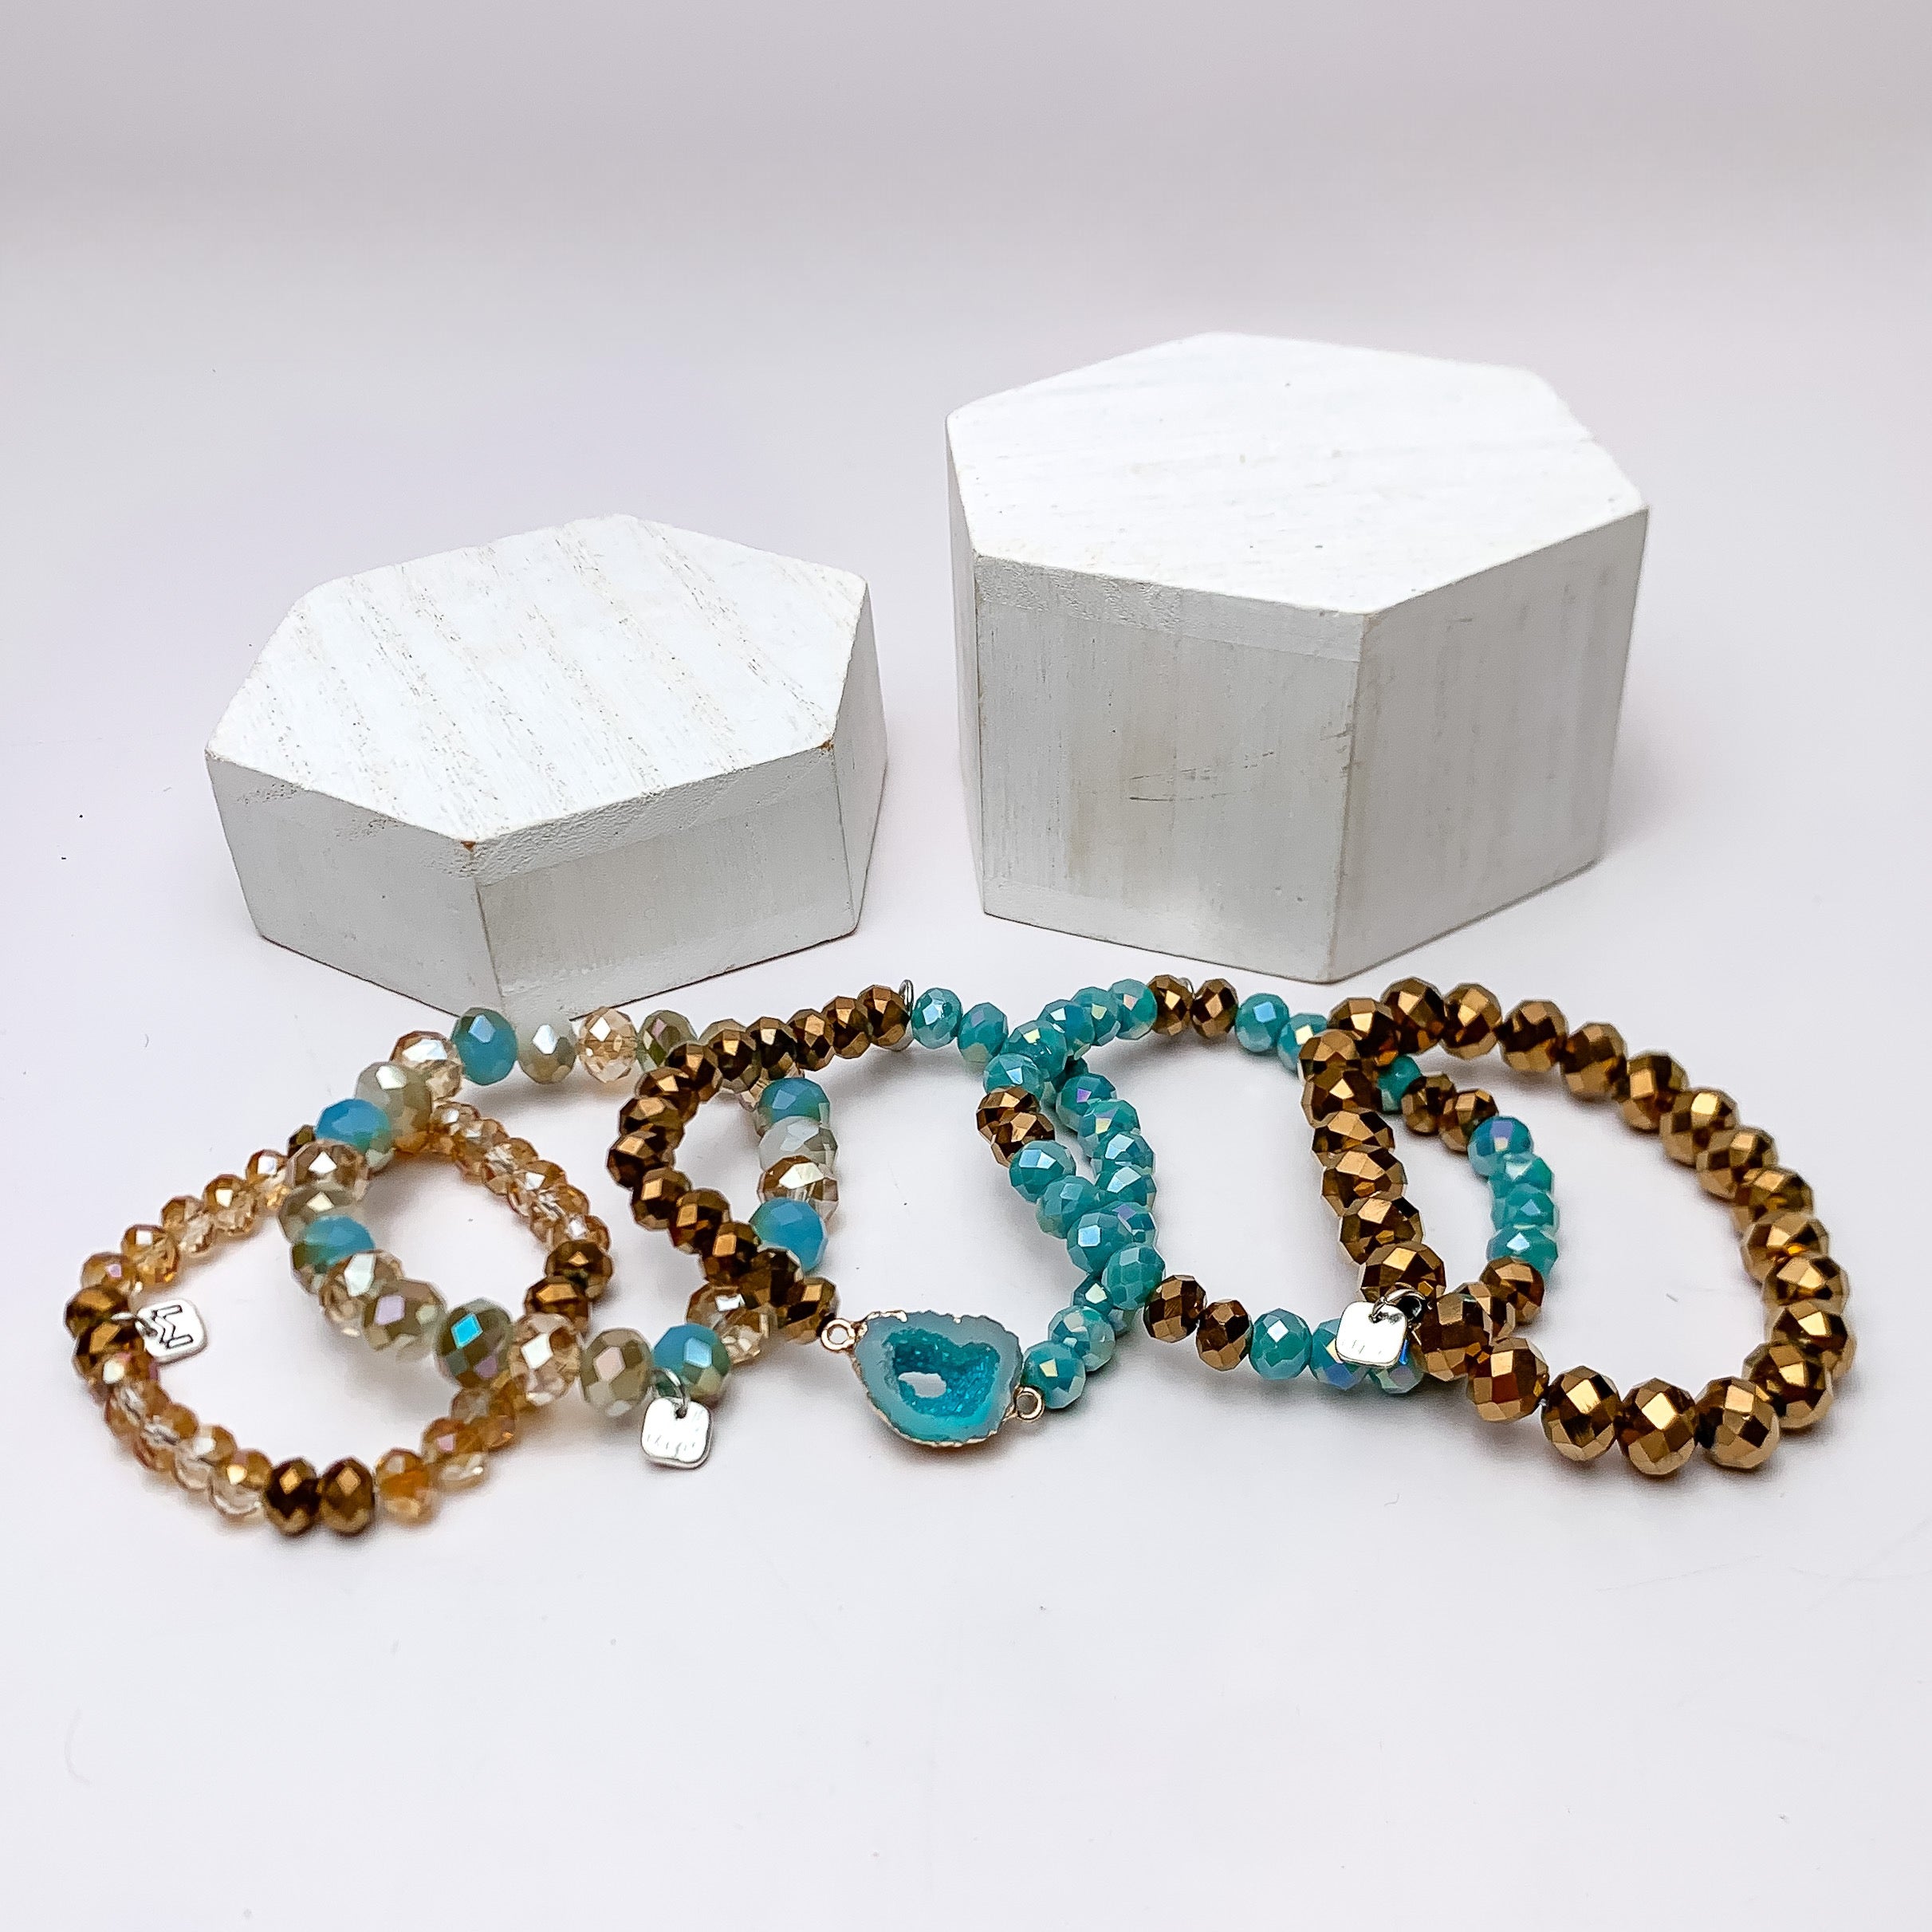 Set of Five | All Nighter Crystal Beaded Bracelet Set in Turquoise Blue and Gold Tones. These bracelets are pictured on a white background with two white podiums behind them.